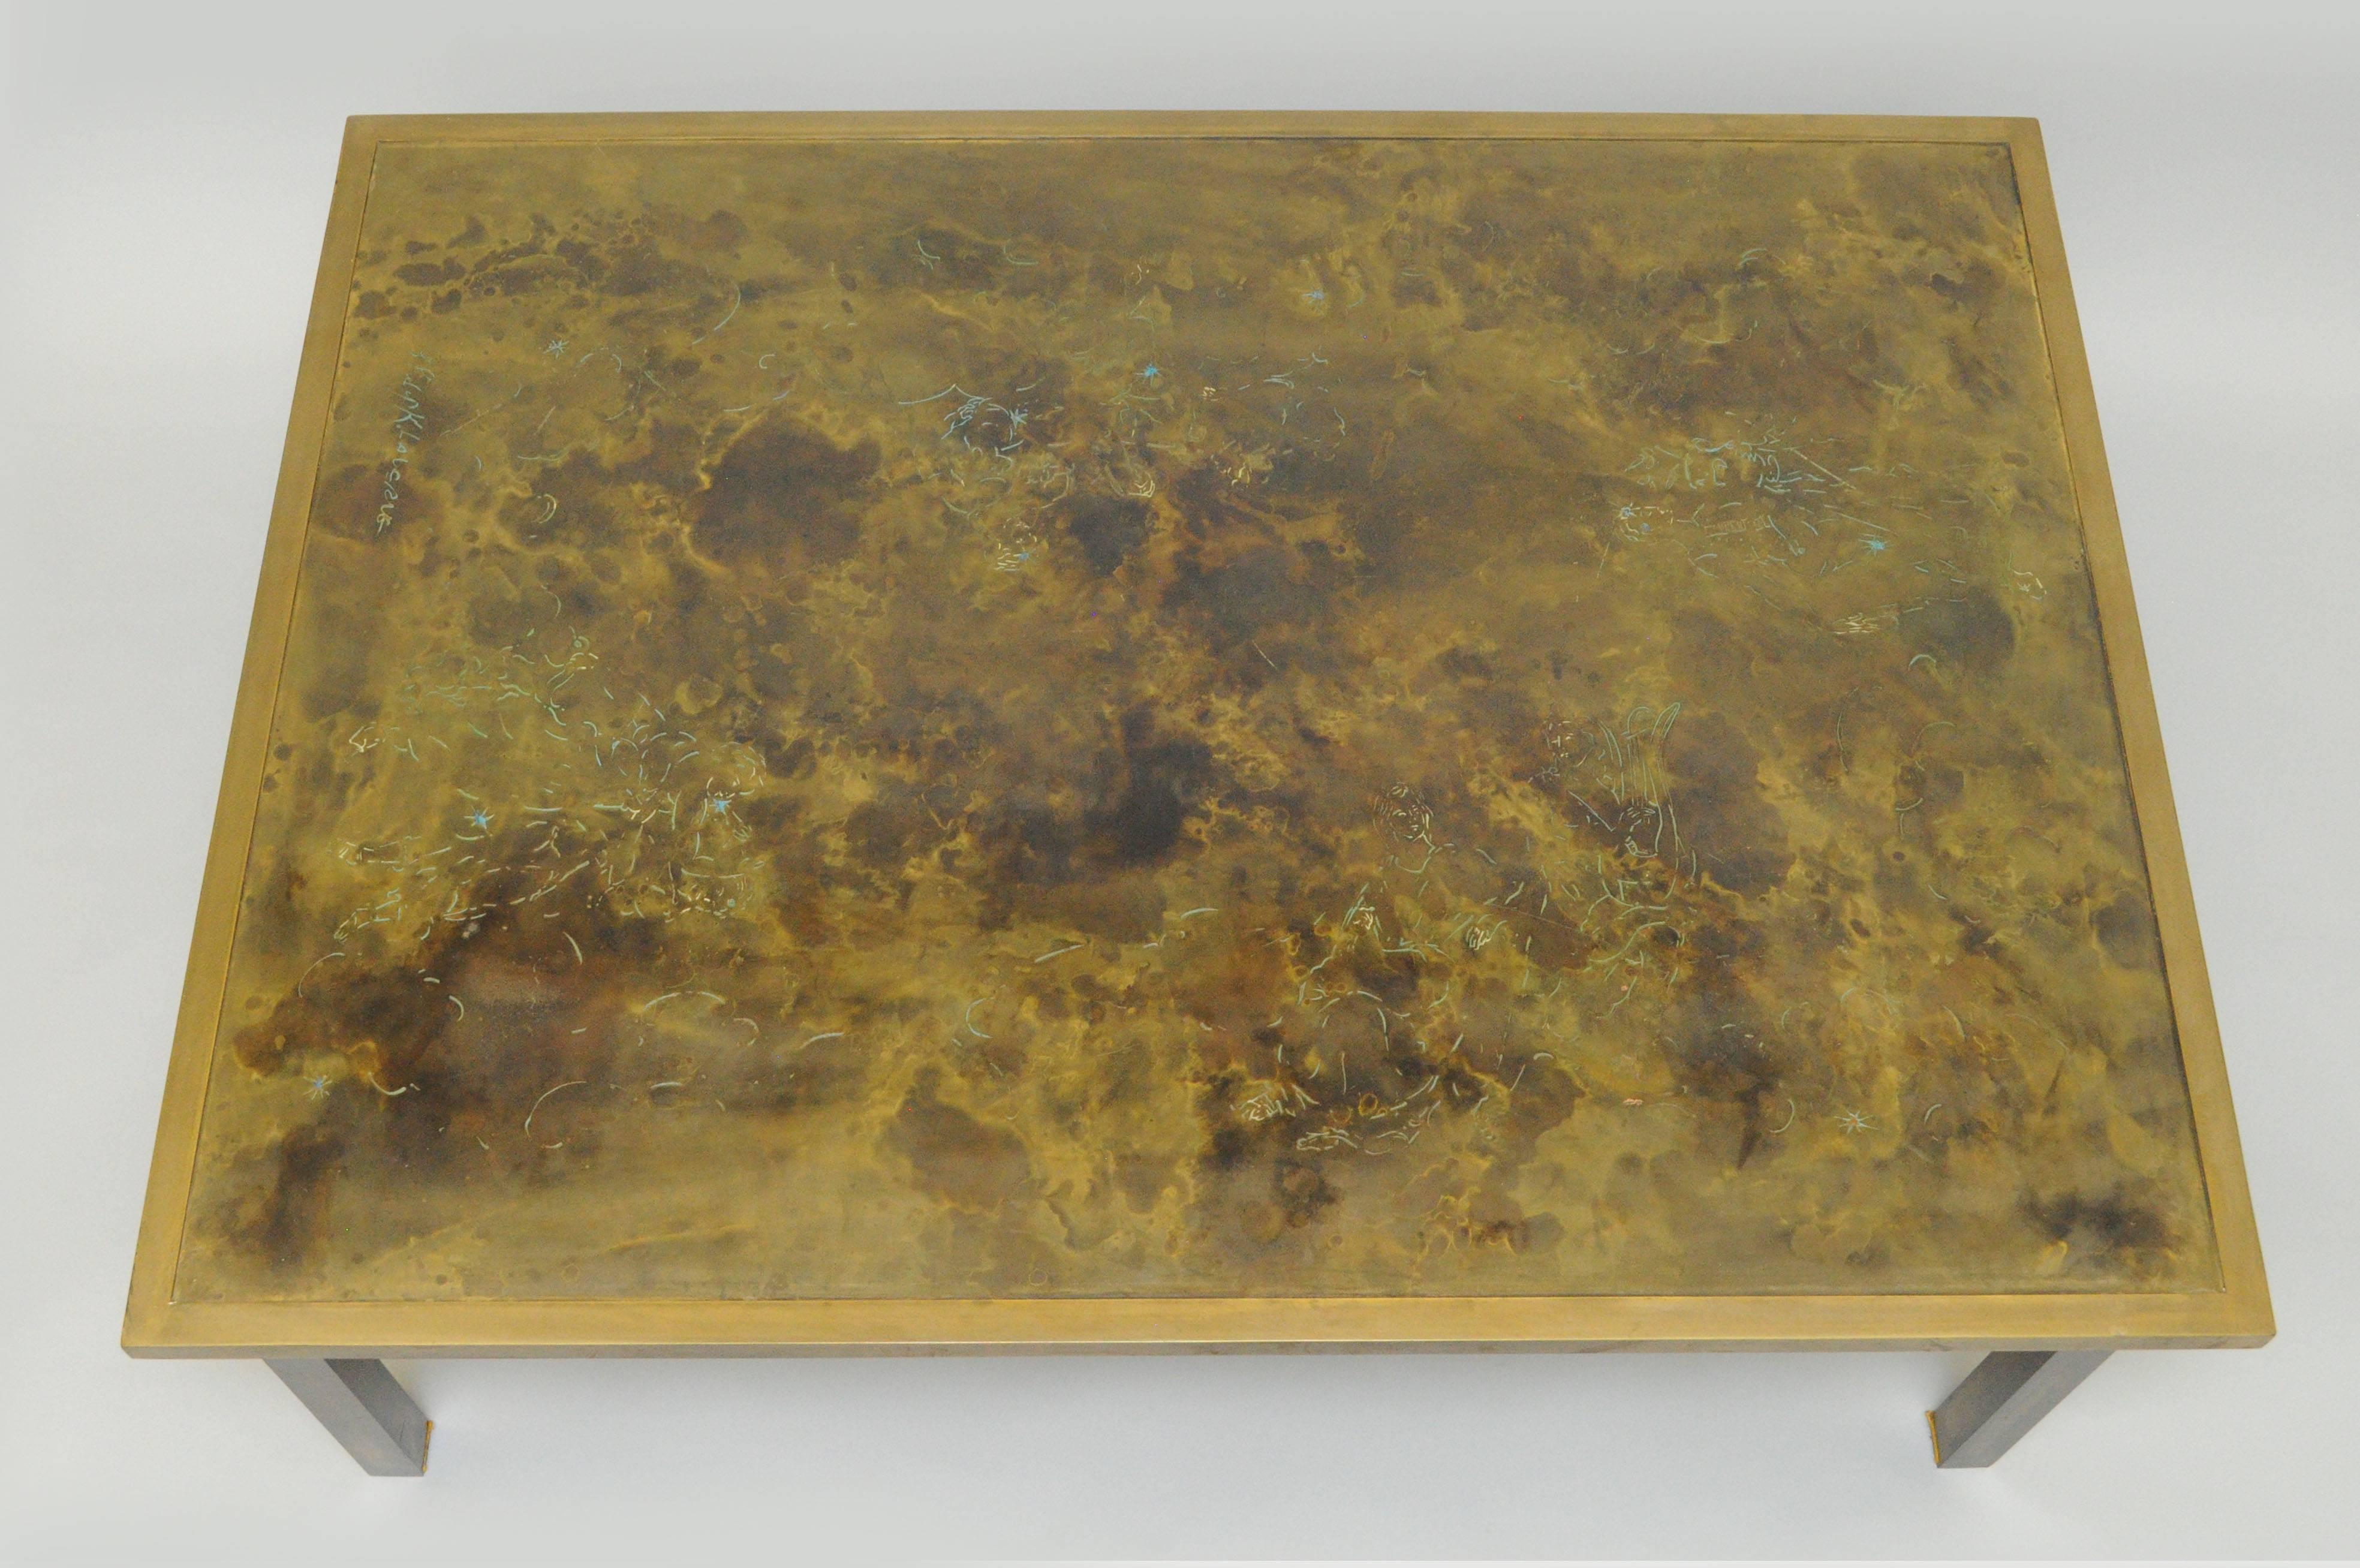 Vintage Philip and Kelvin LaVerne Acid Etched bronze 'Zodiac' coffee table. Item features an acid washed bronze finish with various Classical scenes etched into the top. Table is raised on four squared legs and signed by Philip K. LaVerne. Table has